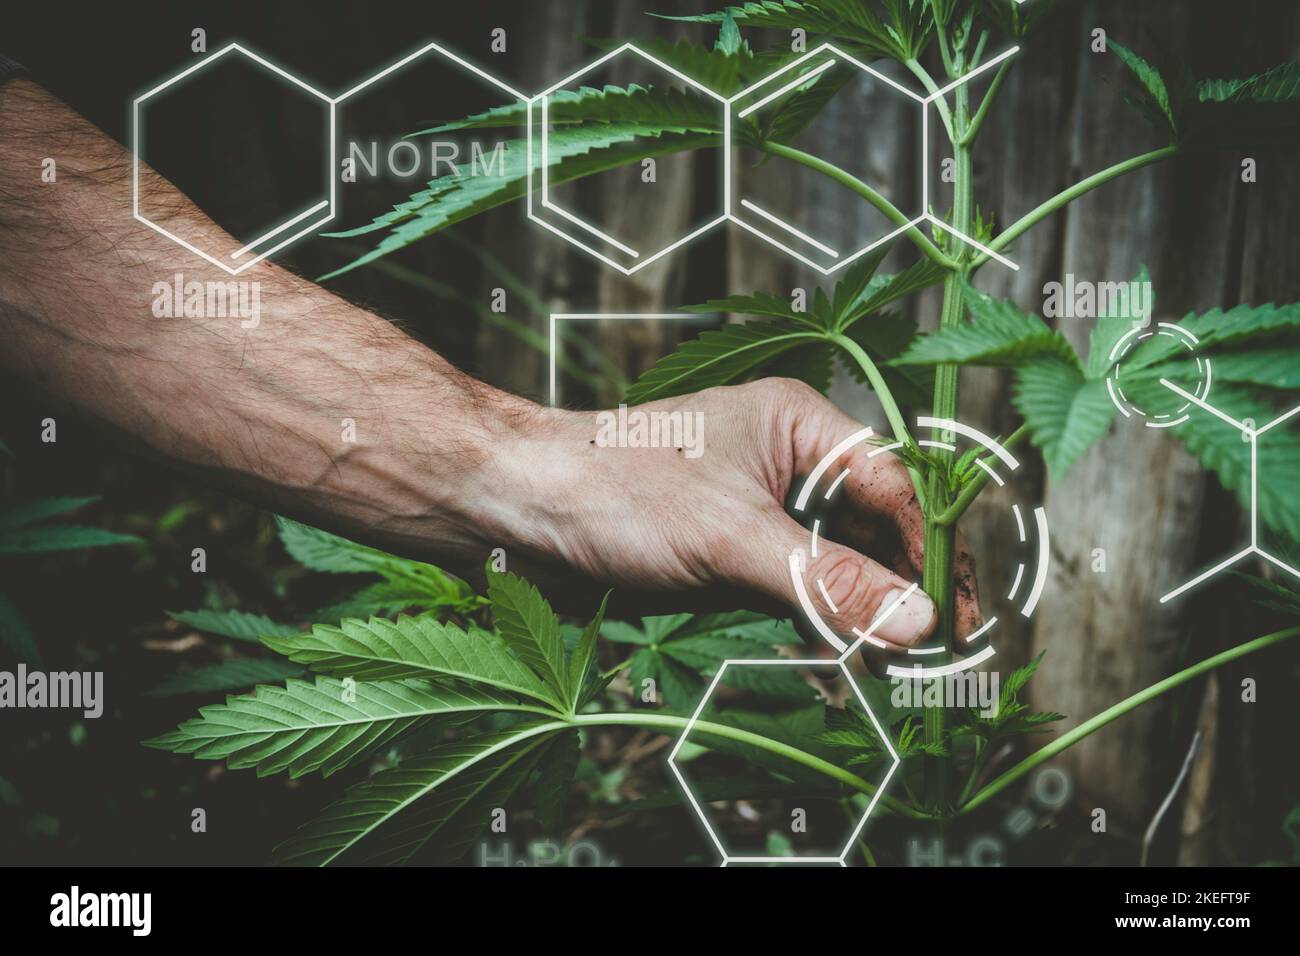 Breeding of new varieties of cannabis. Chemical formulas in plant growing. The chemical composition of hemp. Healthy Plant Formula. Smart farming, usi Stock Photo